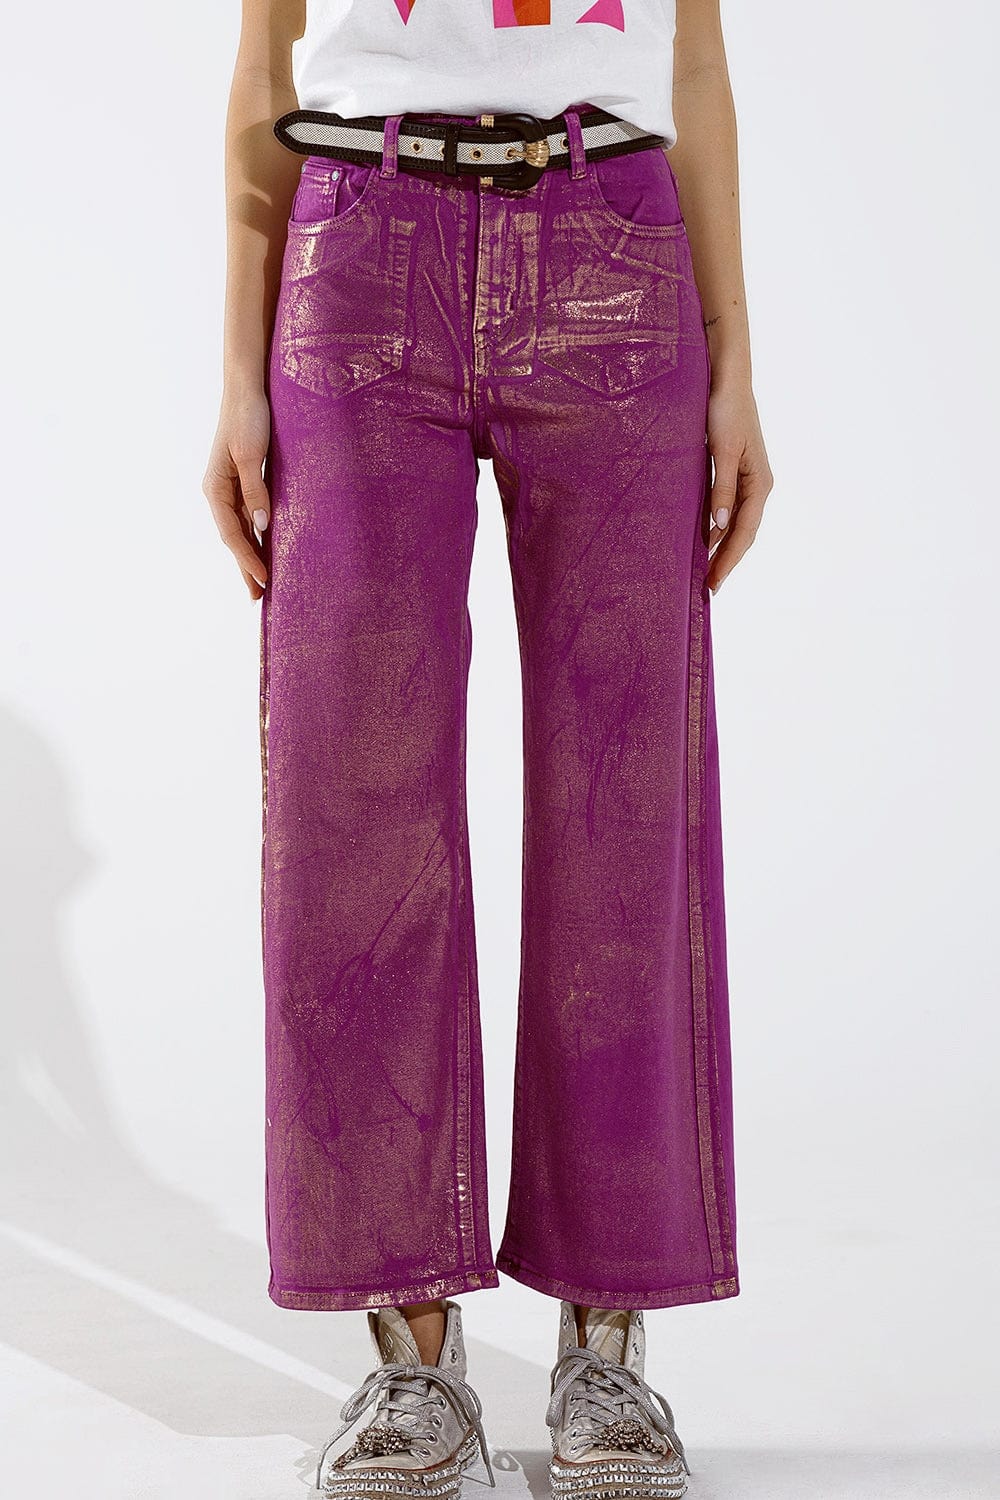 Q2 Women's Jean Magenta Wide Leg Jeans With Metallic Finish In Gold